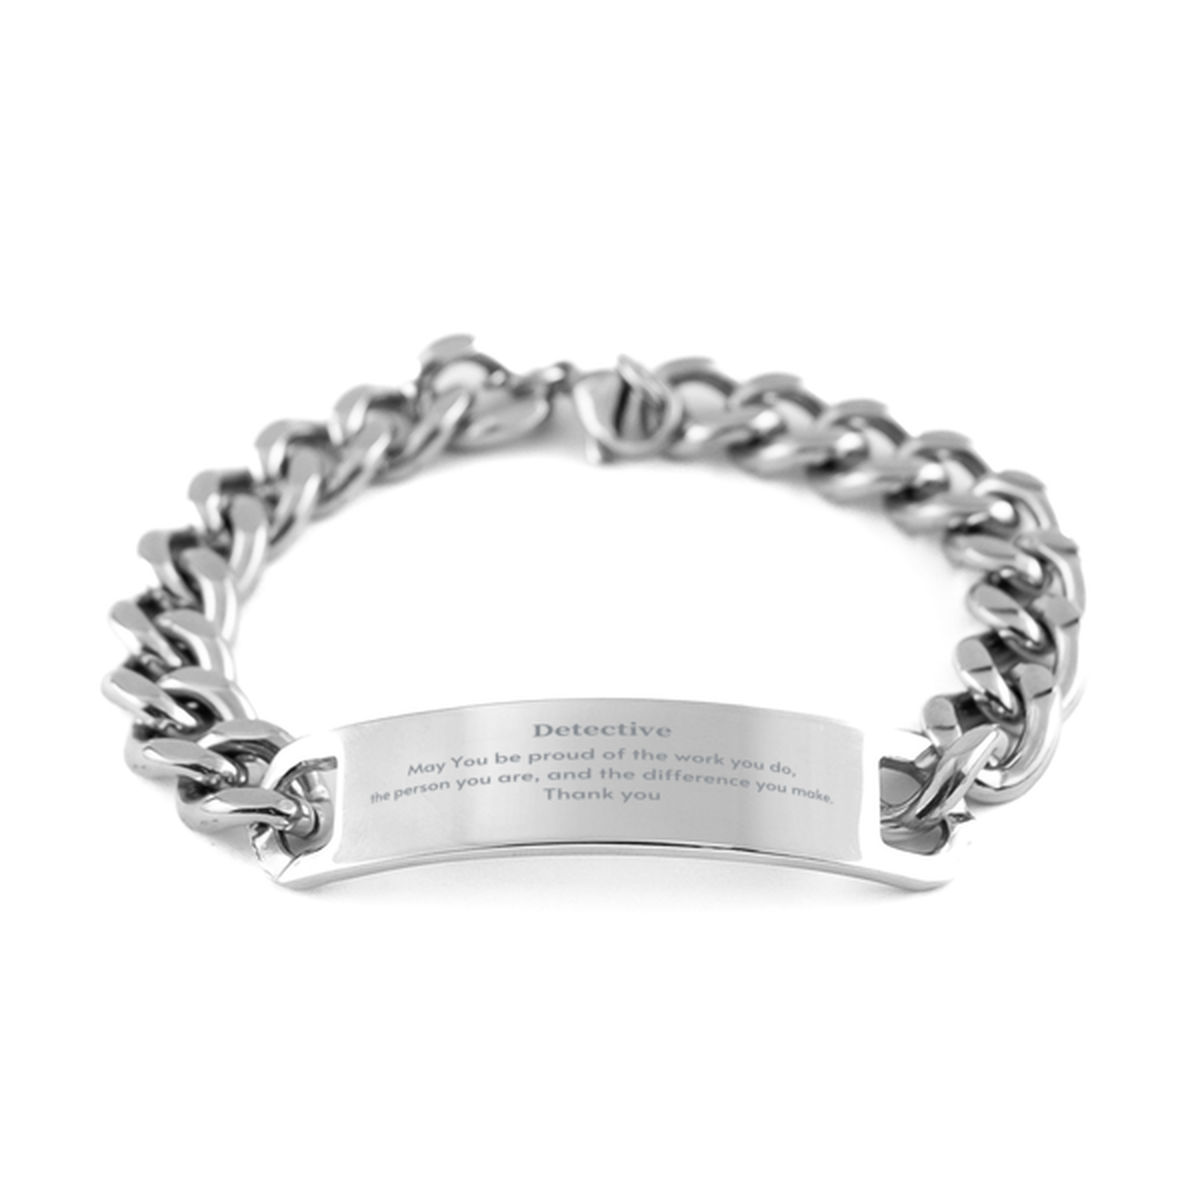 Heartwarming Cuban Chain Stainless Steel Bracelet Retirement Coworkers Gifts for Detective, Detective May You be proud of the work you do, the person you are Gifts for Boss Men Women Friends